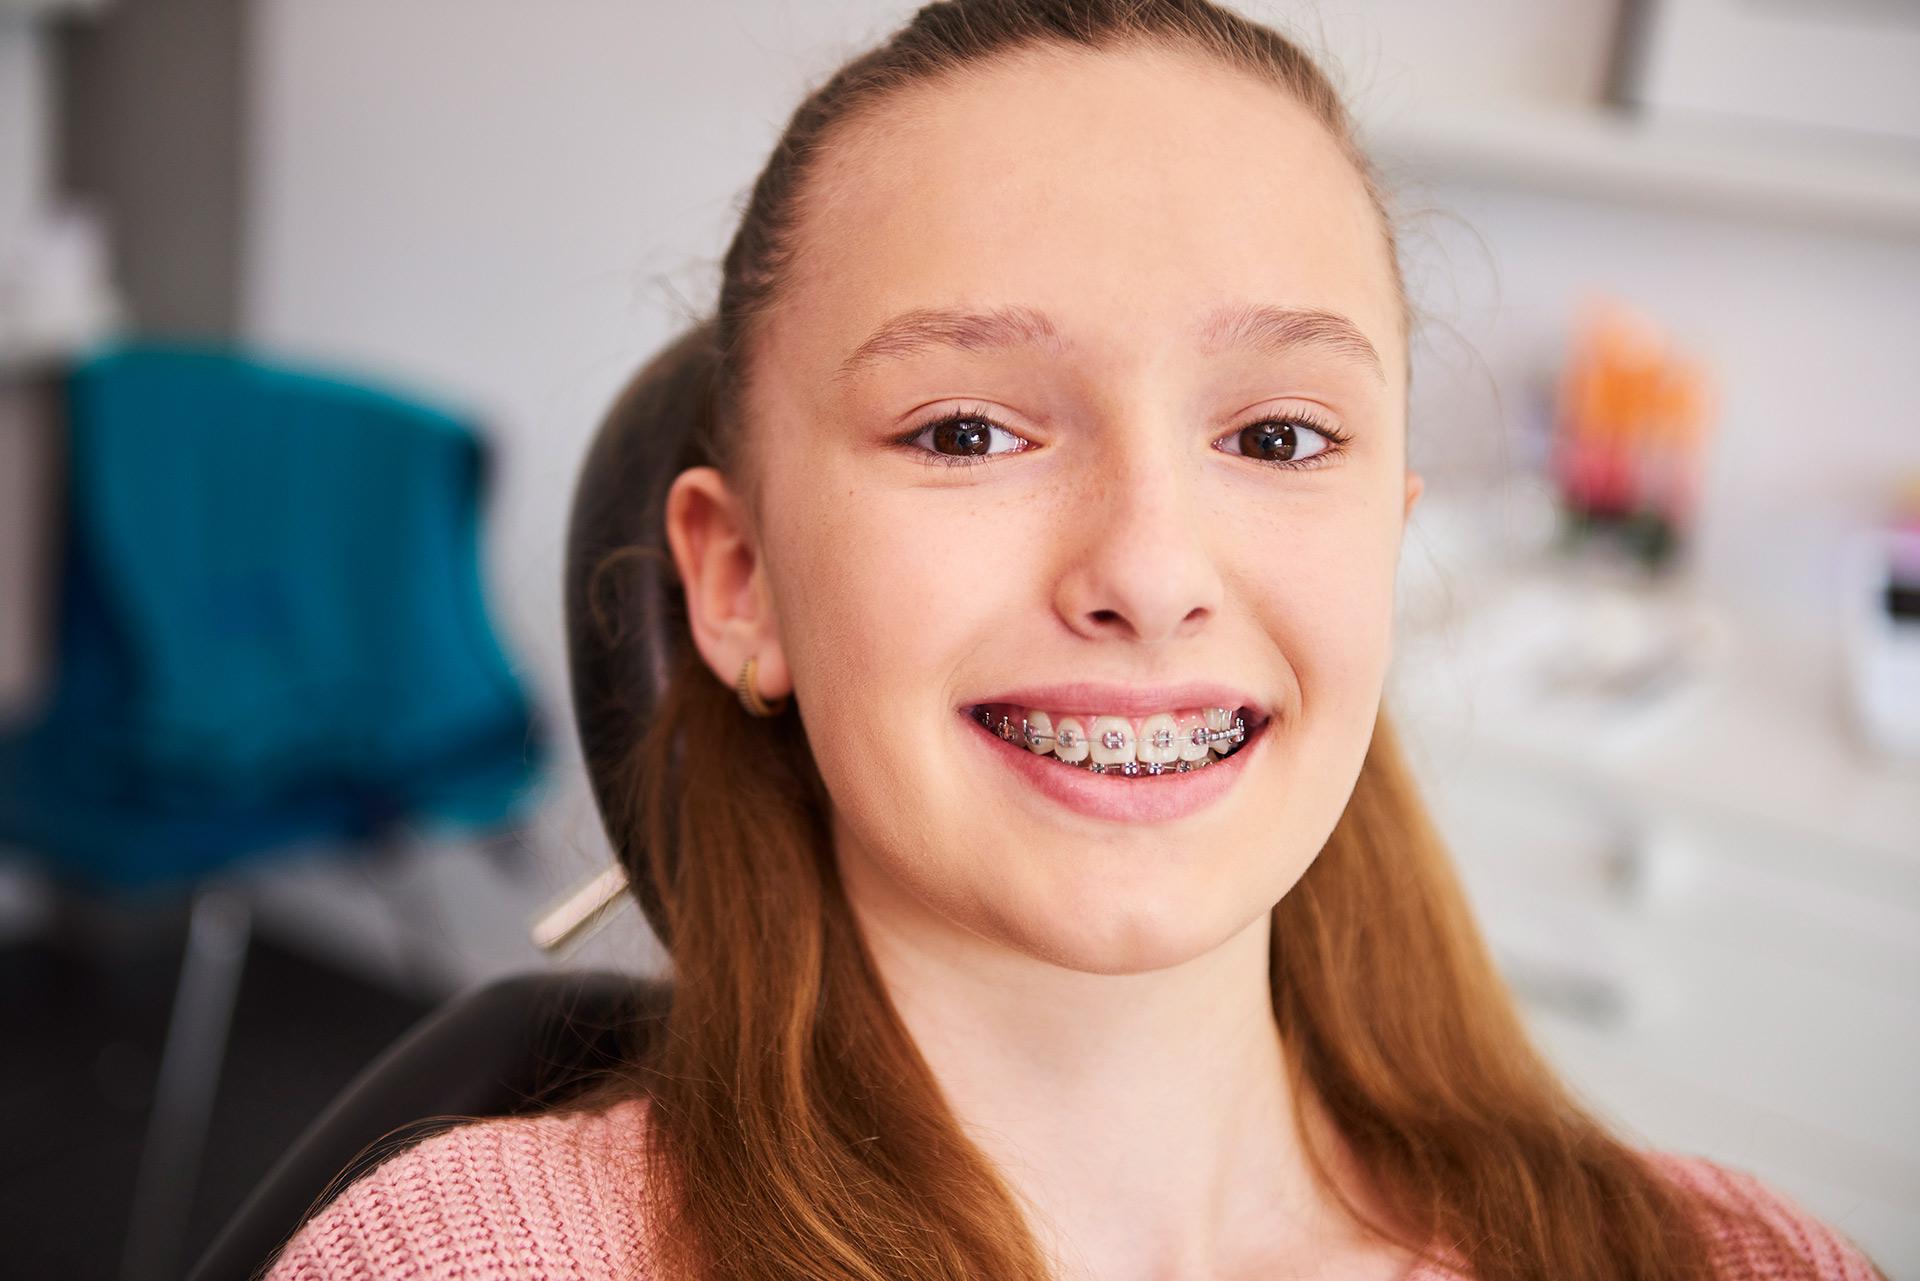 Young girl from Wilshire Center at an appointment for her braces